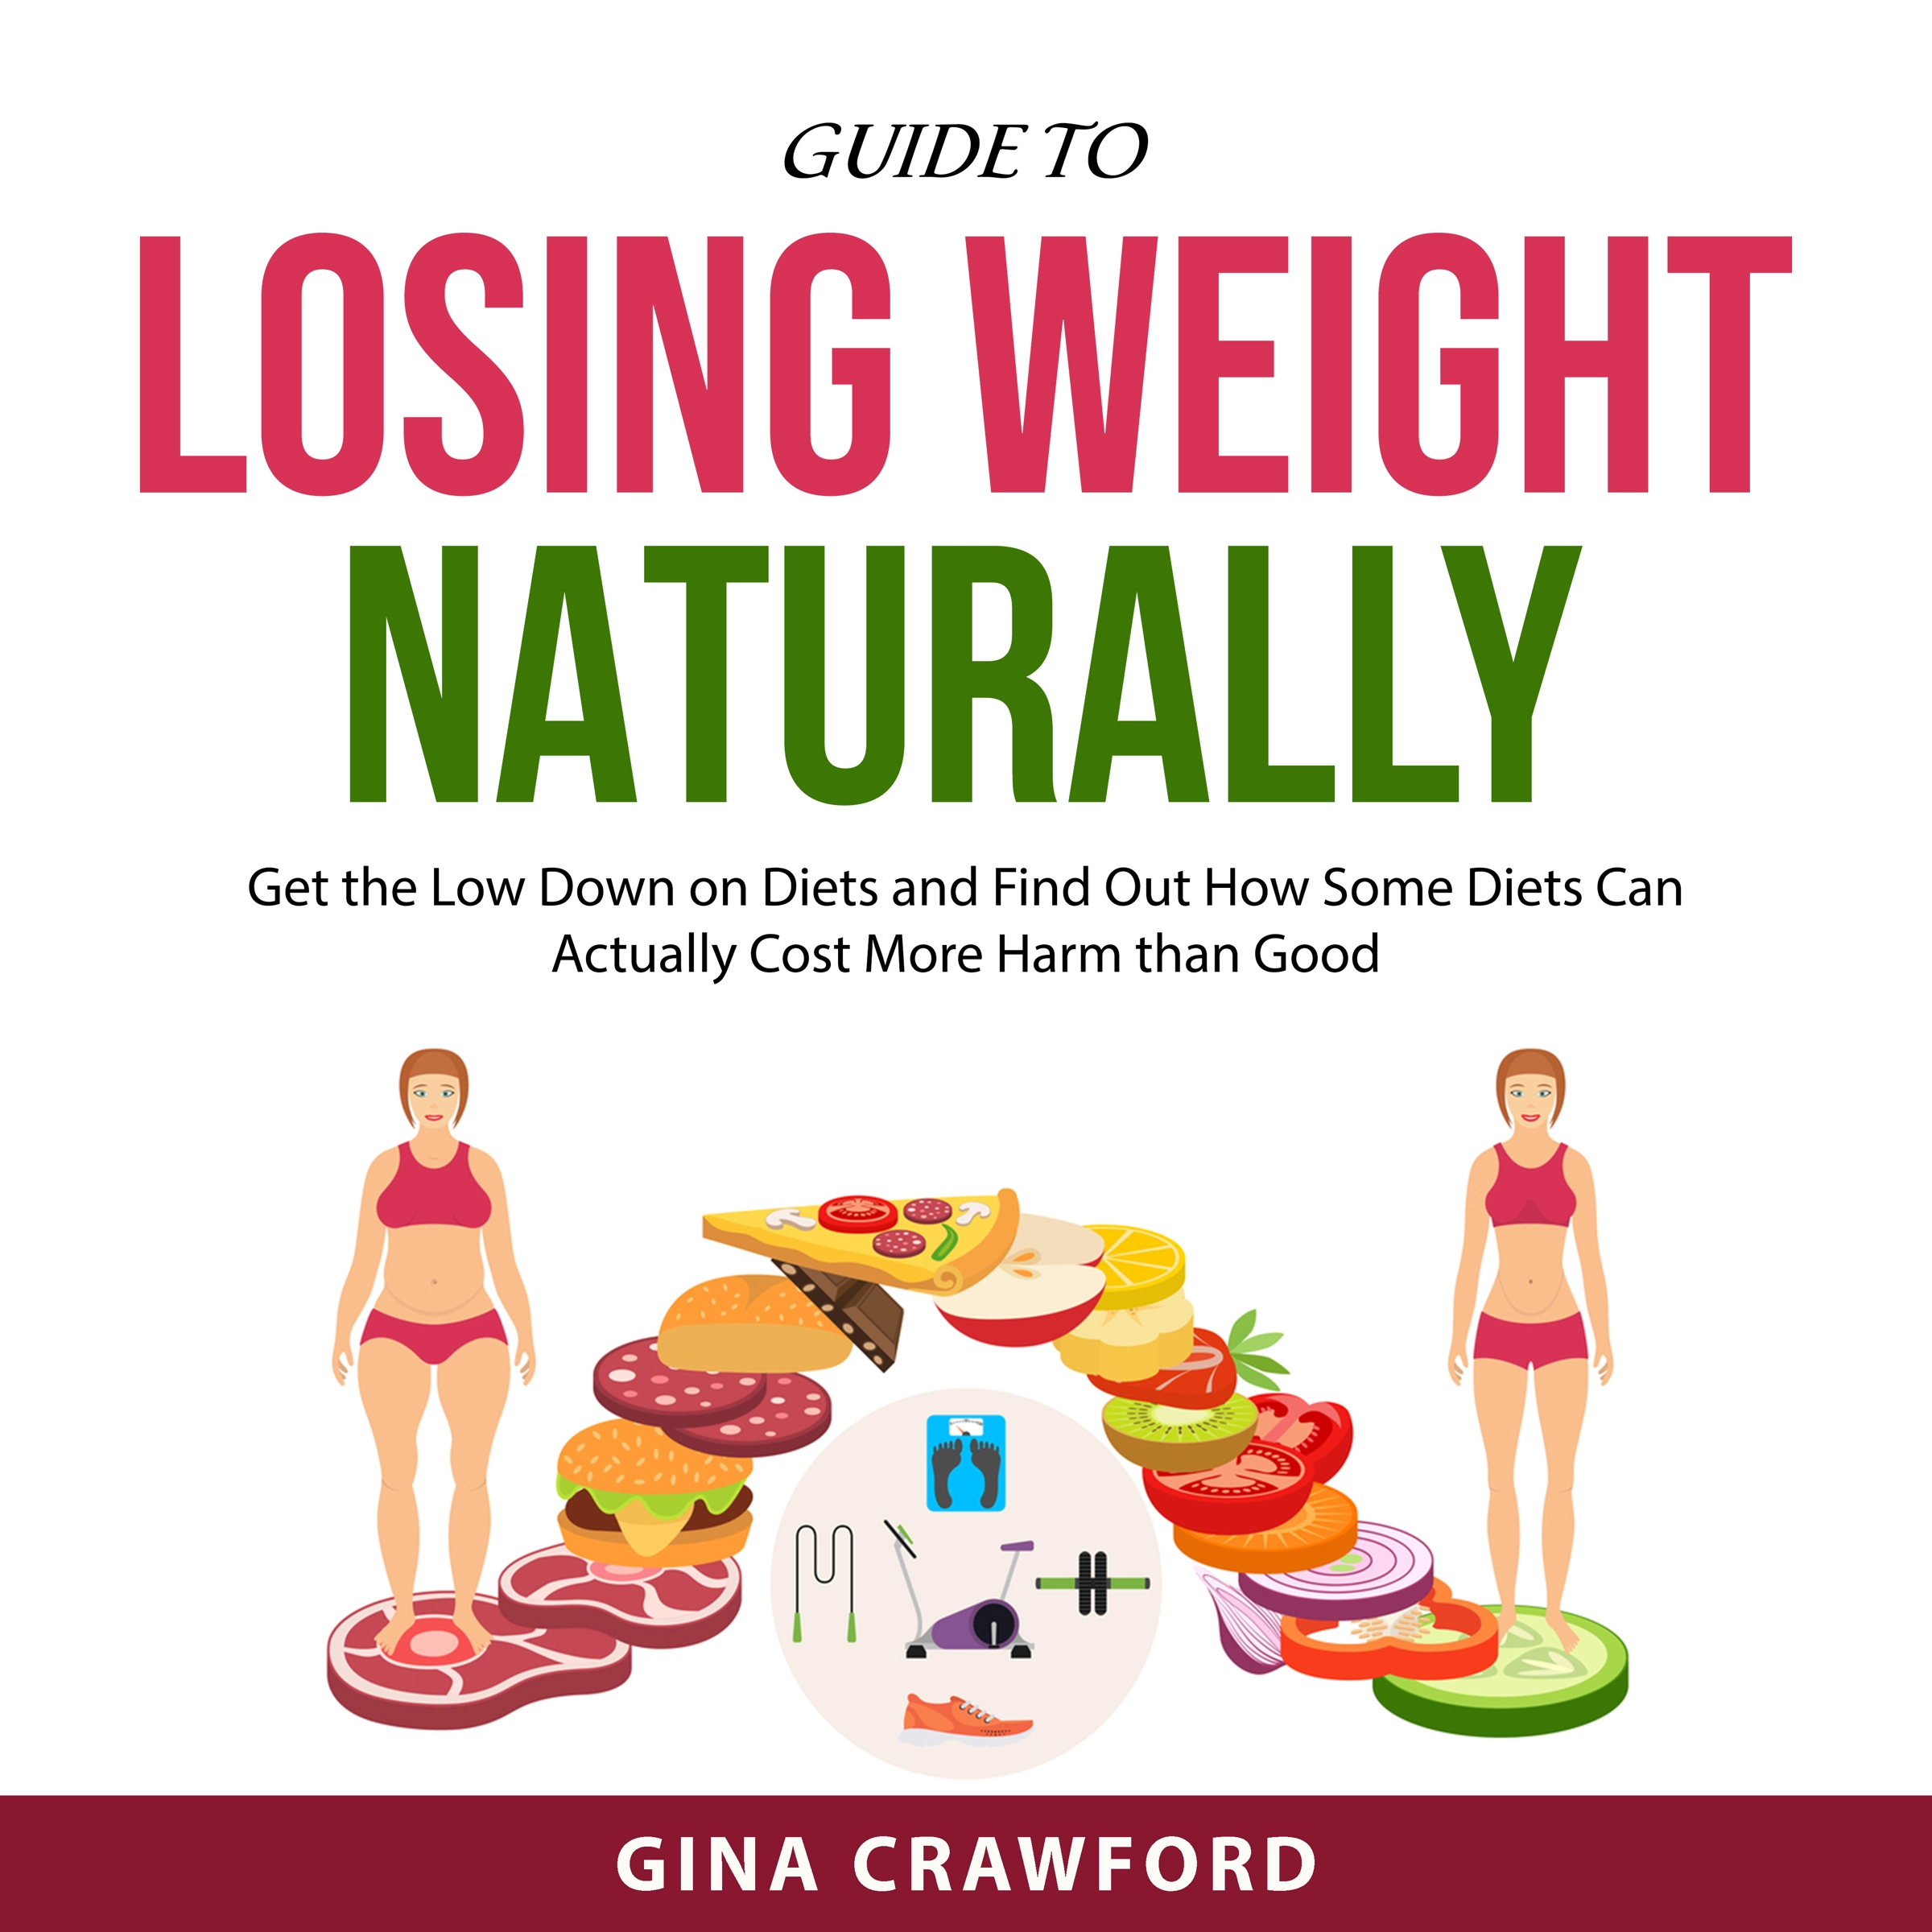 Guide to Losing Weight Naturally Audiobook by Gina Crawford